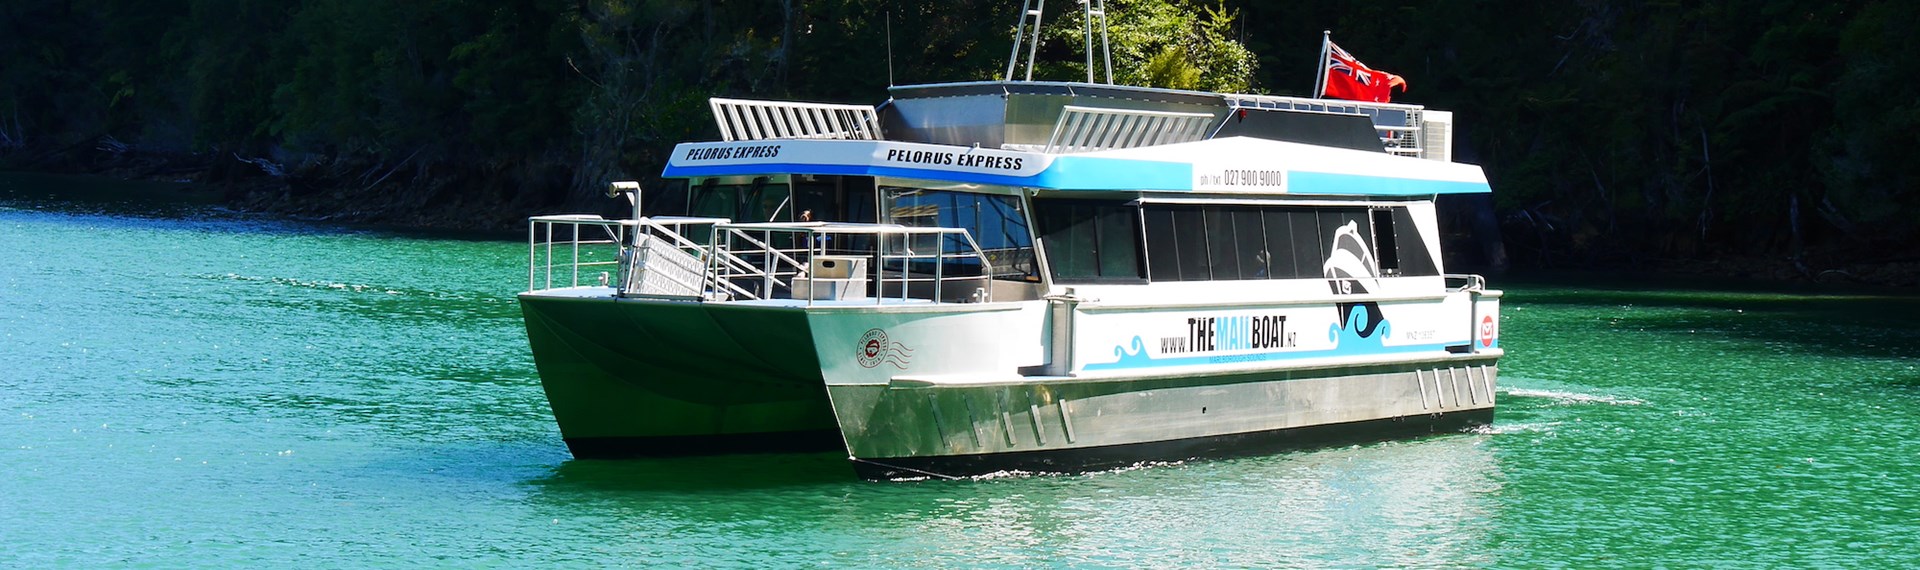 Our Pelorus Mail Run Cruise in the beautiful blue/green waters of the Pelorus Sound/Te Hoiere with a bush backdrop.